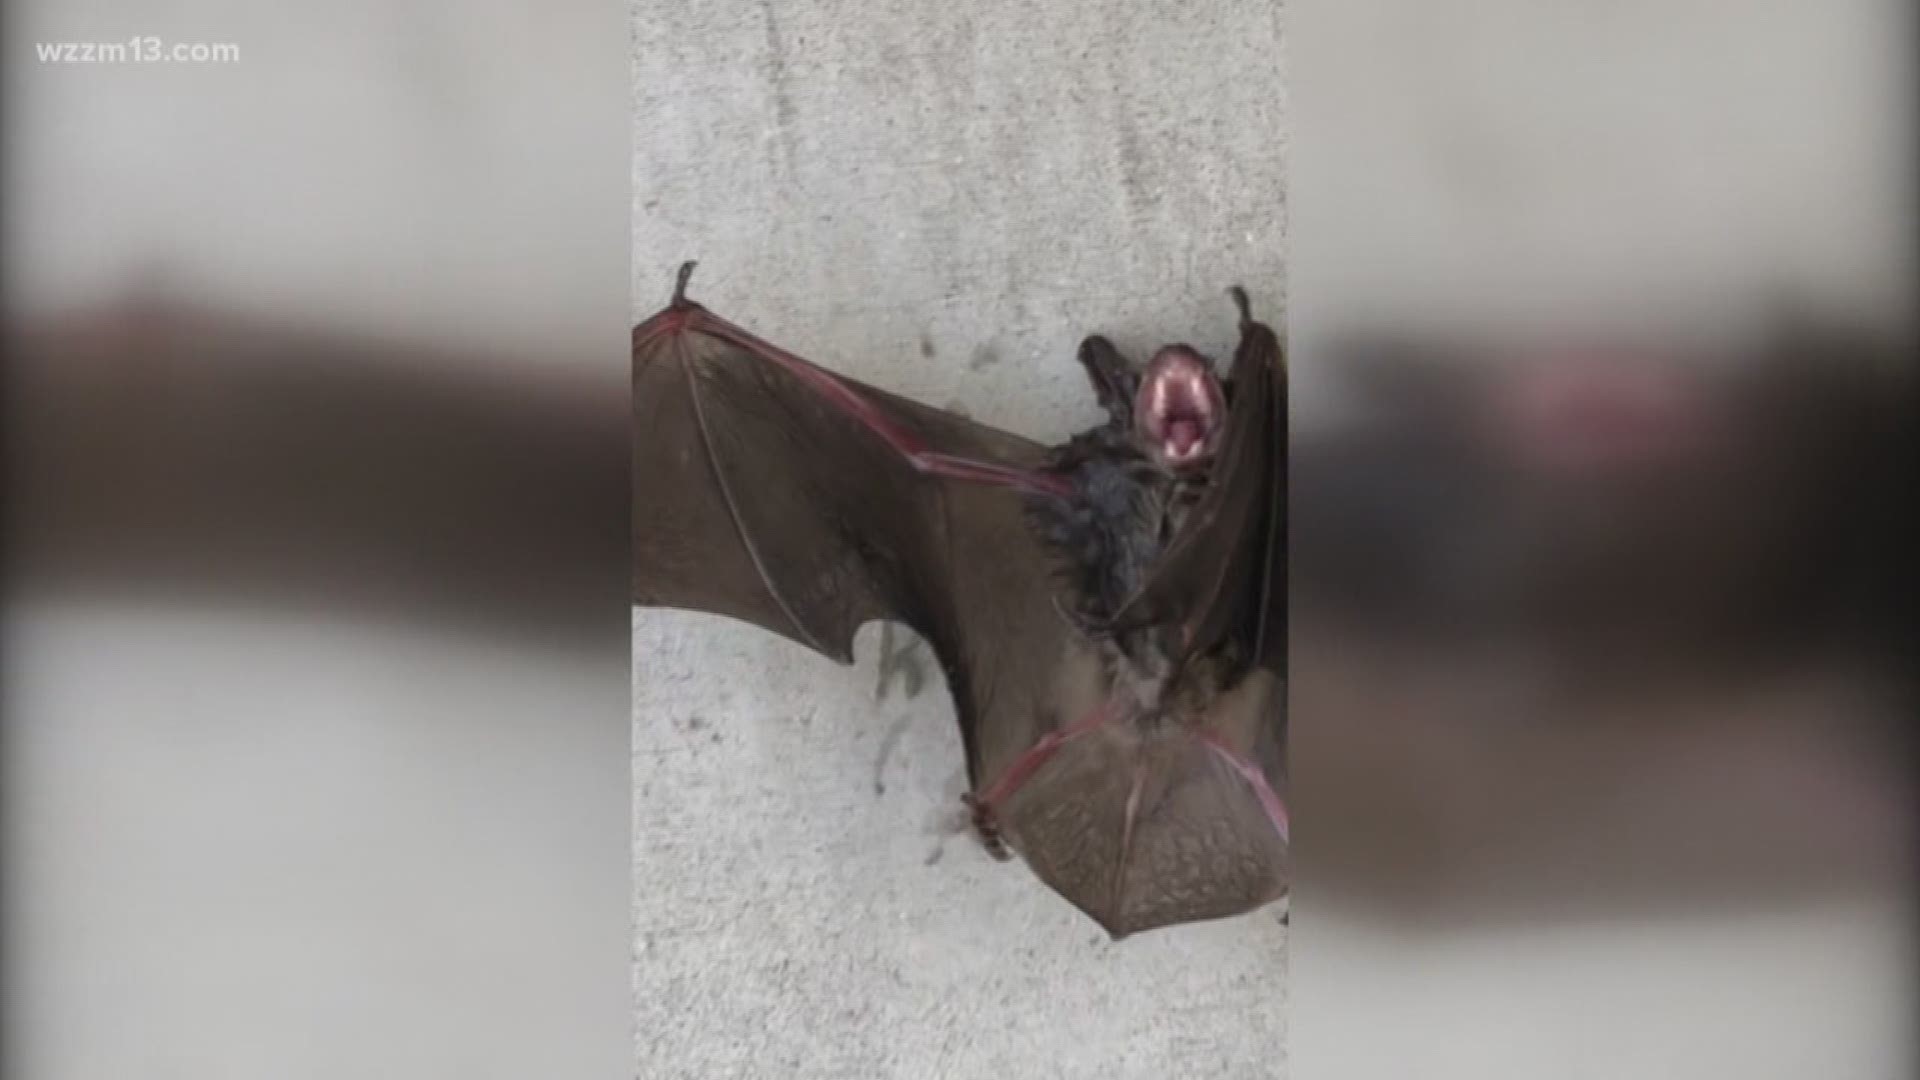 Verify: Bats in the West Michigan